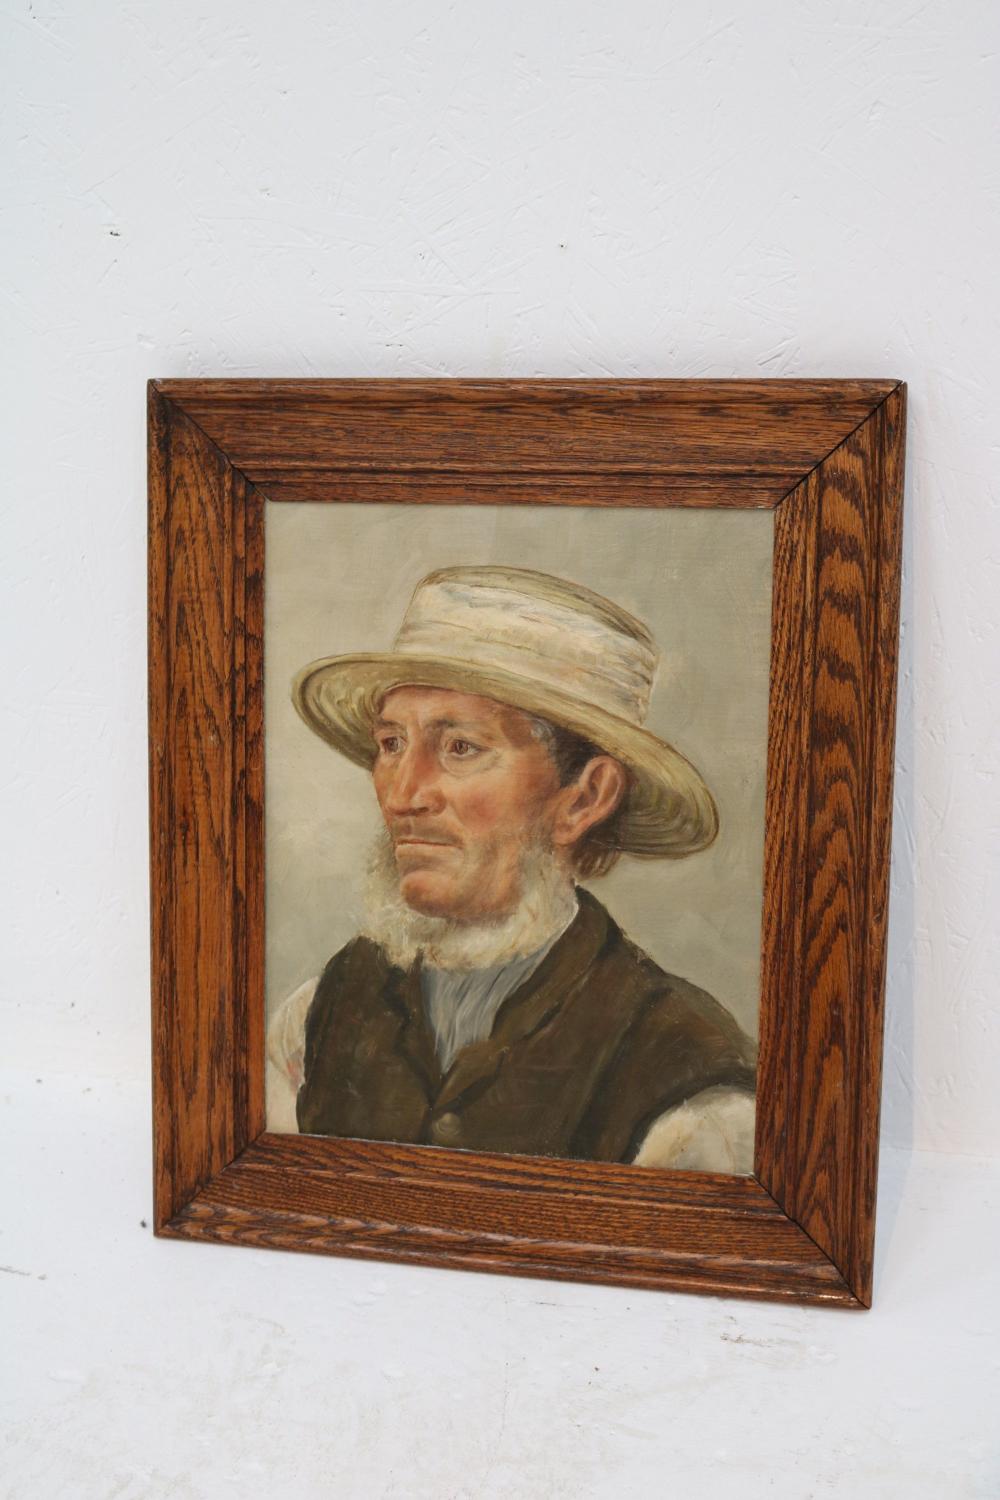 19th century painting of an Amish man